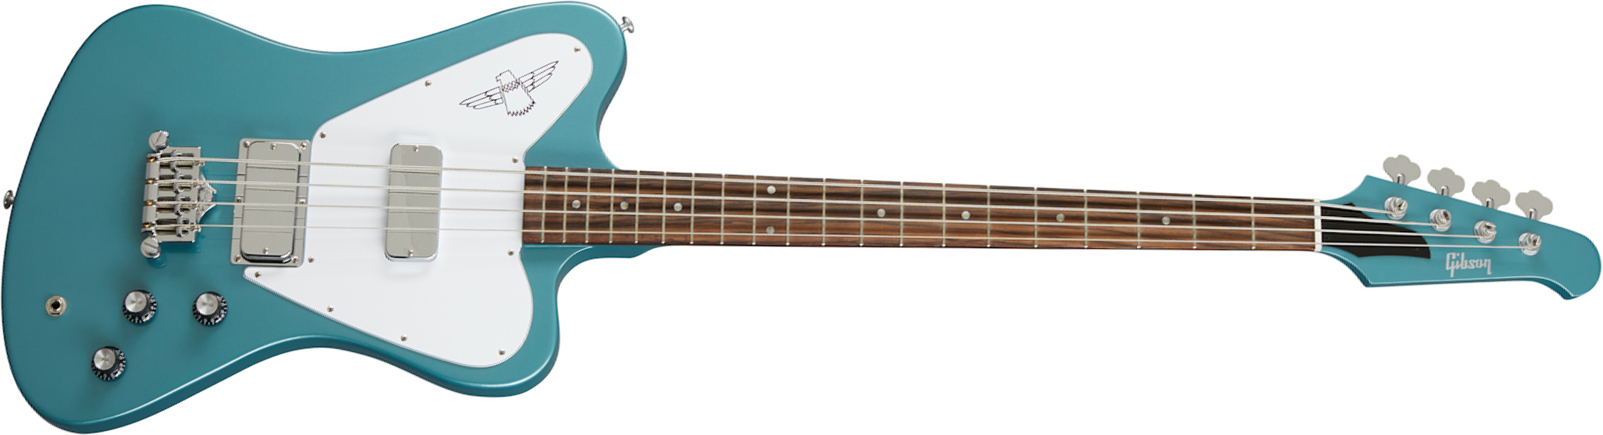 Gibson Non-reverse Thunderbird Modern Rw - Faded Pelham Blue - Solid body electric bass - Main picture